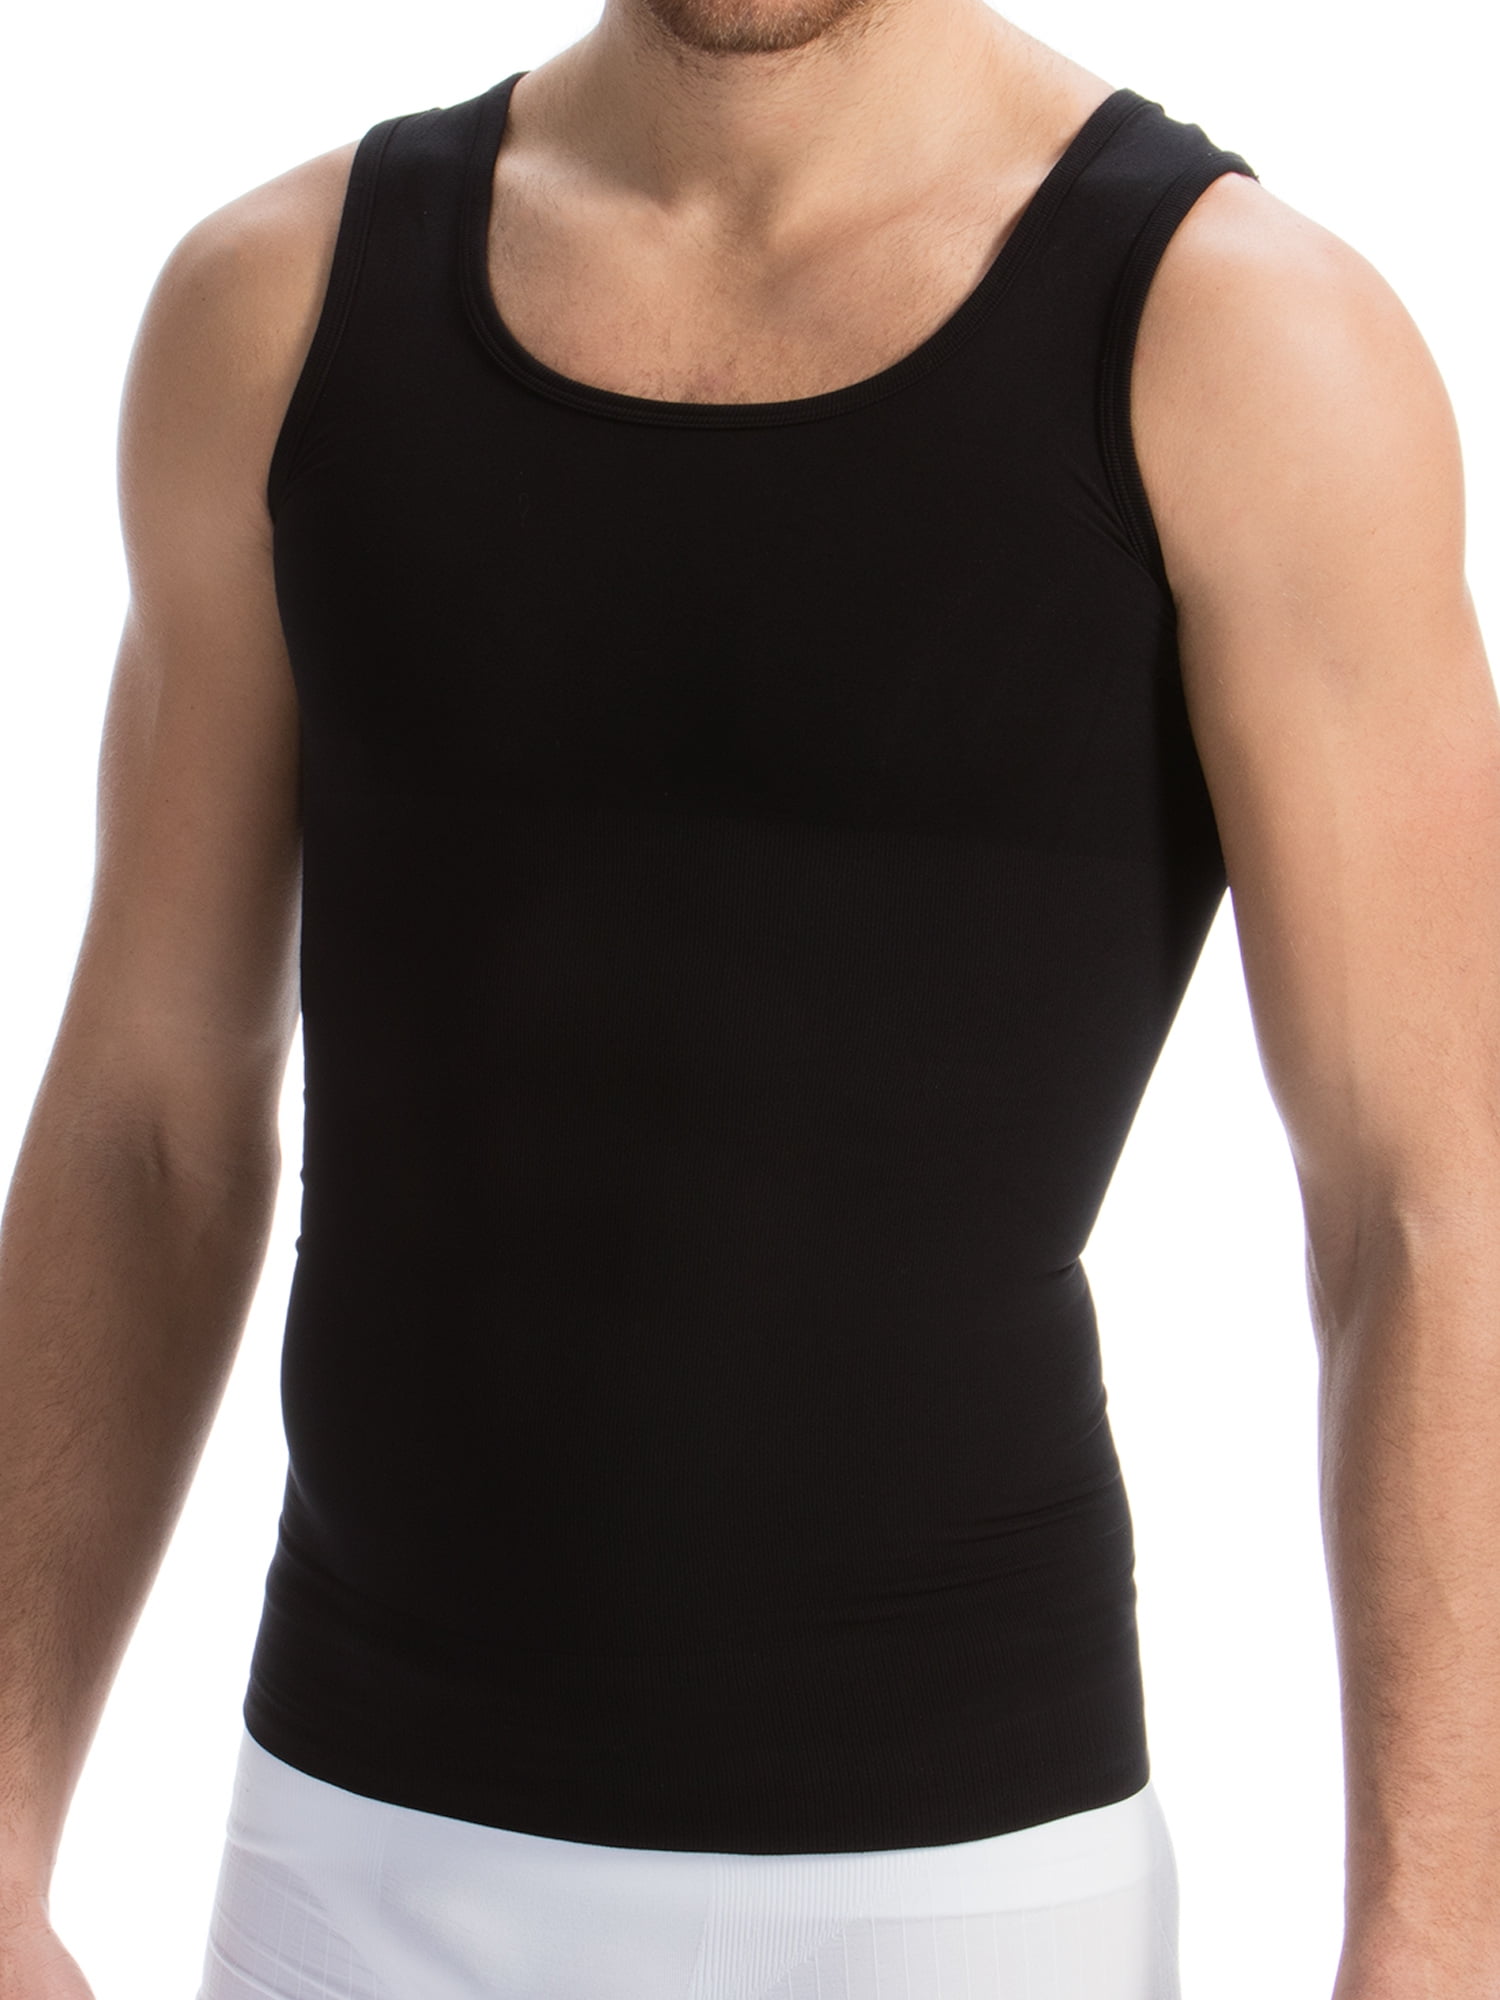 Gotoly Men Body Slimming Shaper Vest Compression Undershirts Girdle for Tummy  Control Tank Top Waist Trainer(Black 4X-Large) 